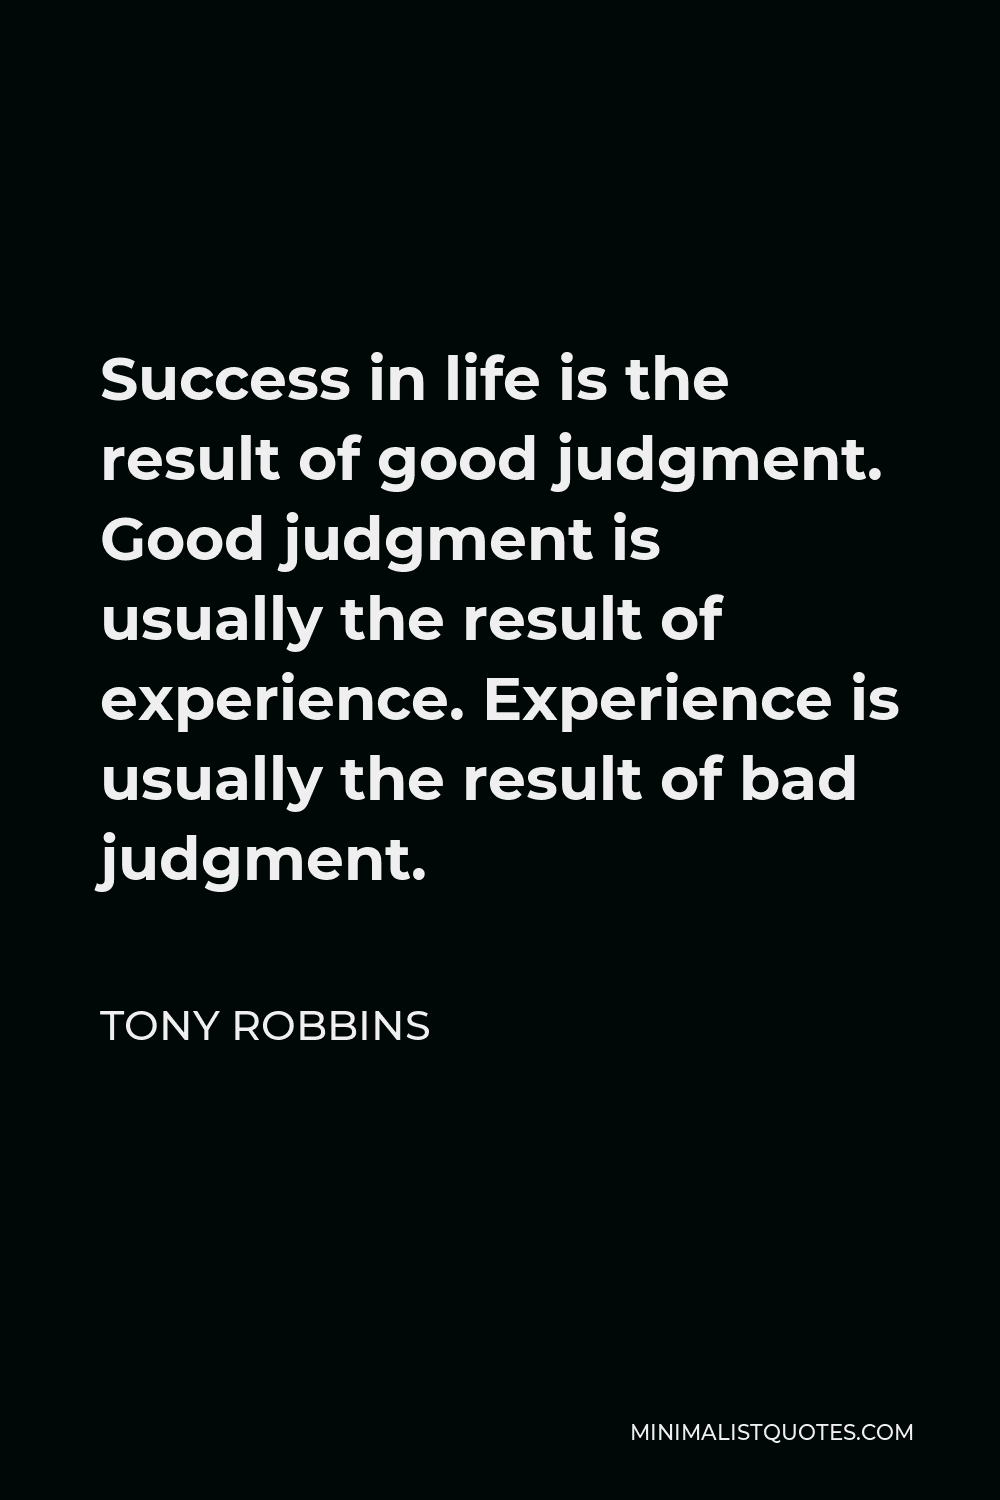 Tony Robbins Quote - Success in life is the result of good judgment. Good judgment is usually the result of experience. Experience is usually the result of bad judgment.